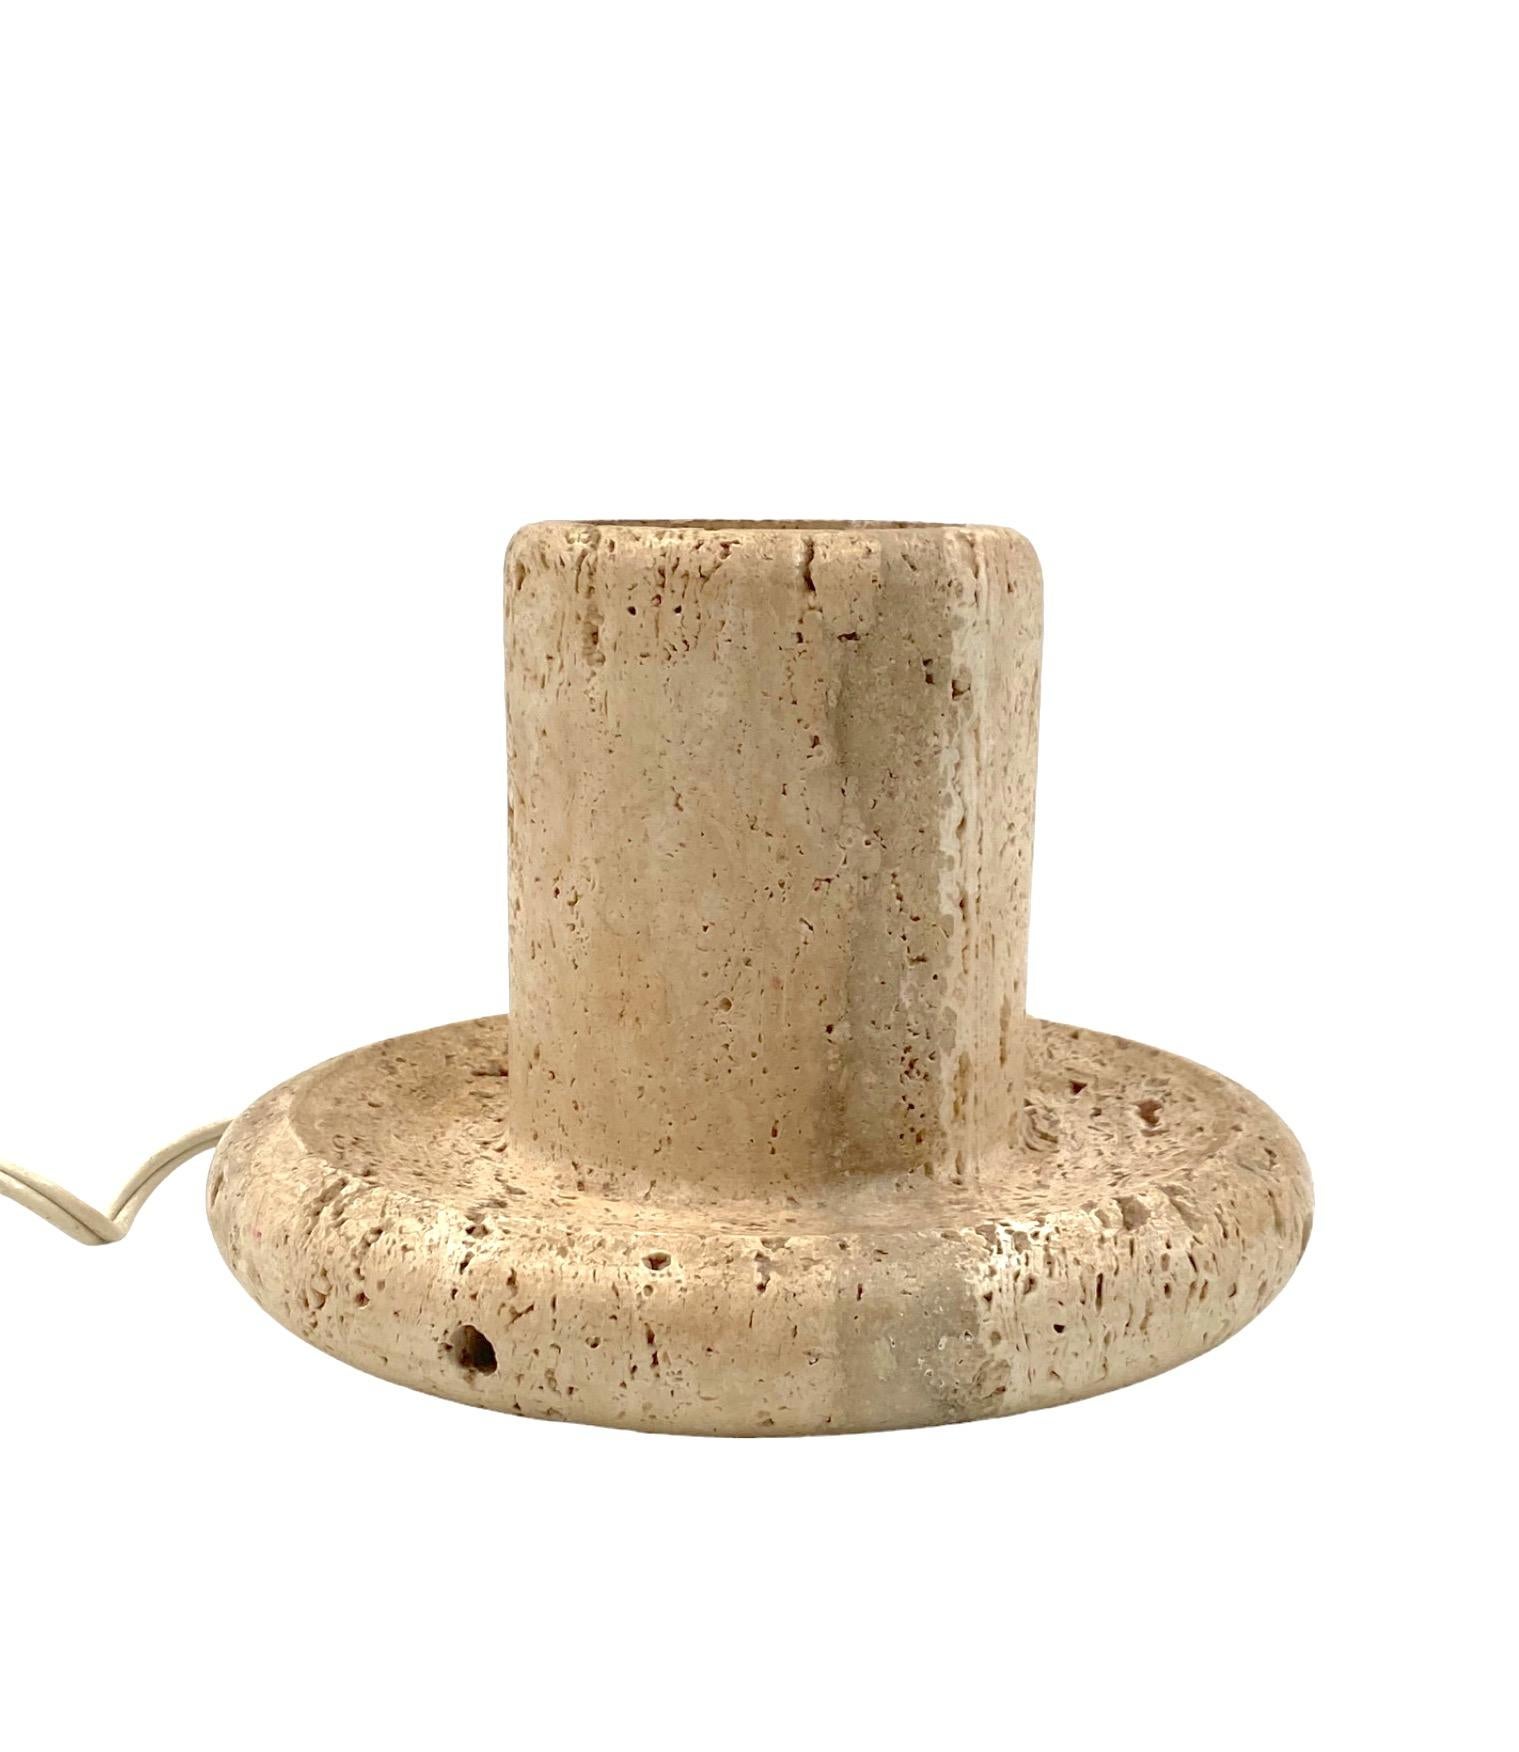 Brutalist travertine table lamp

Italy 1970s.

H 15 cm

Diam. 23cm

Conditions: excellent consistent with age and use. In working conditions.